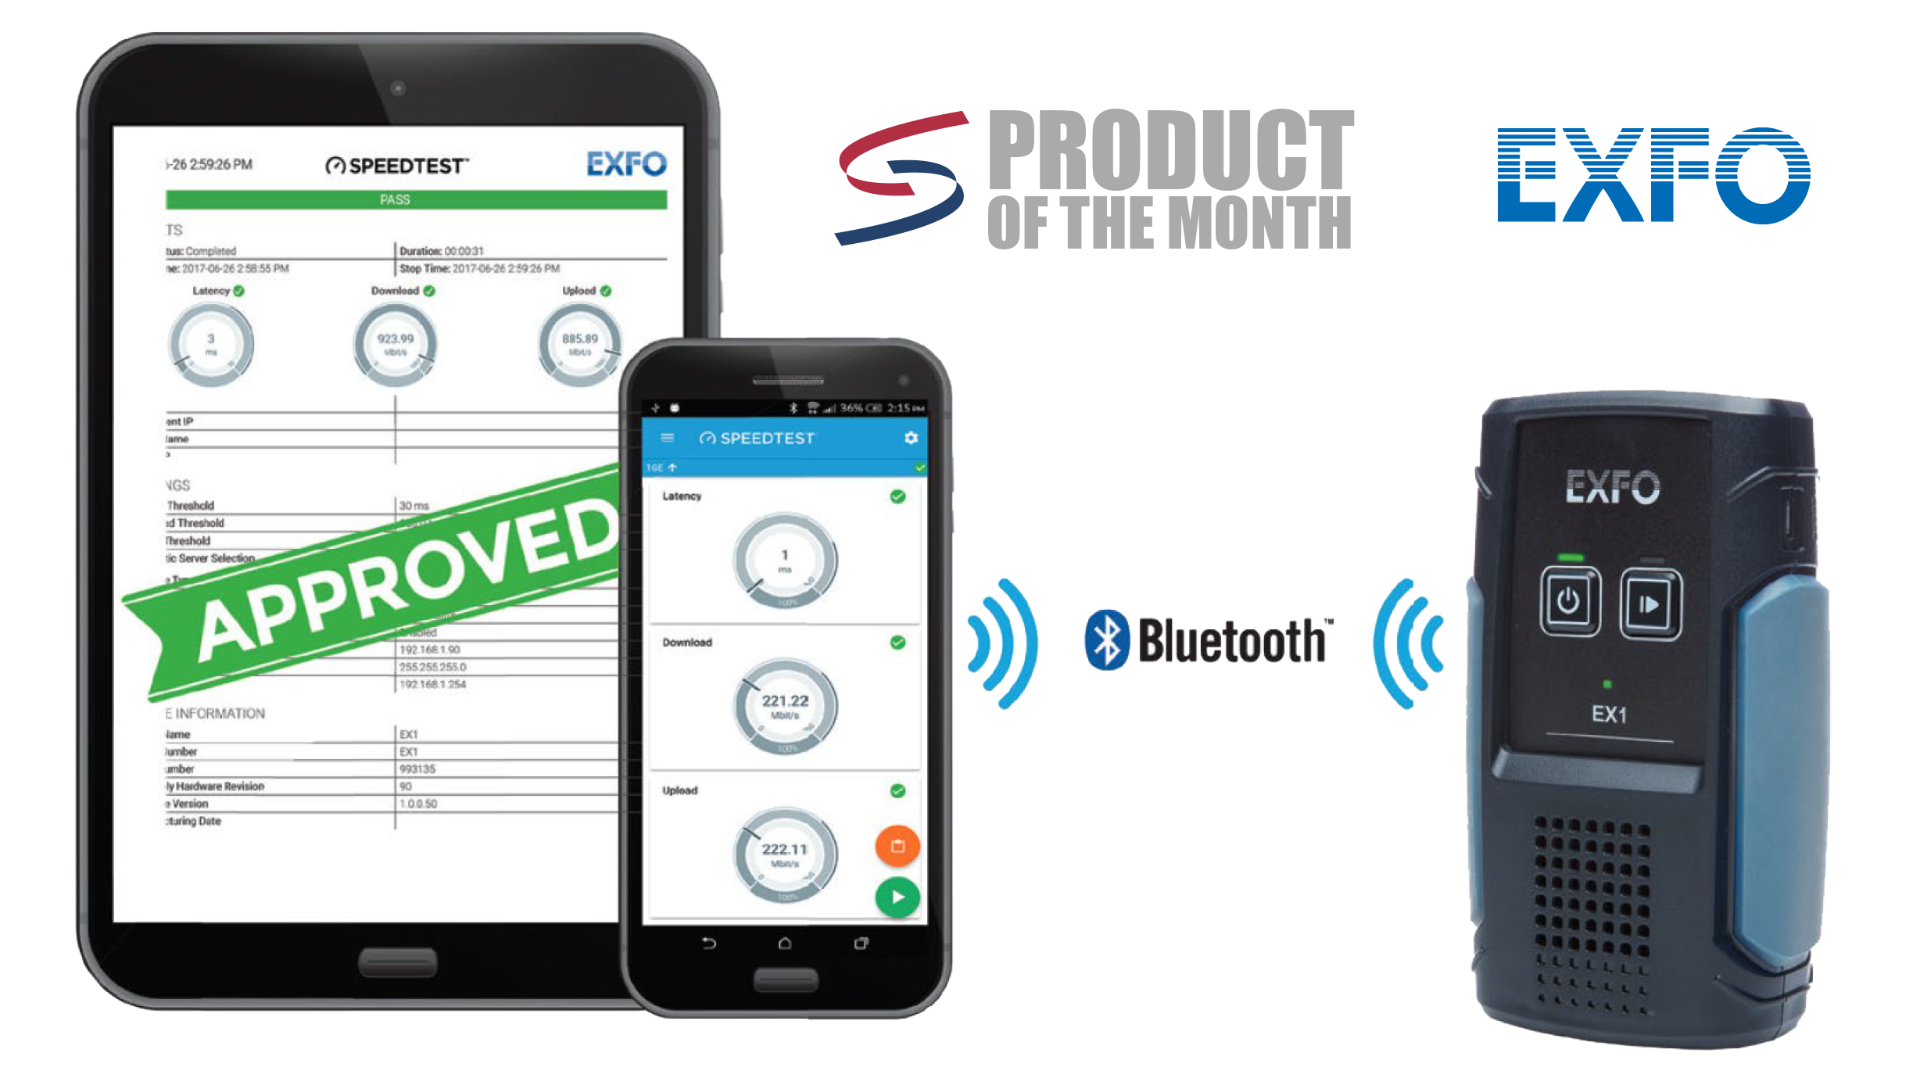 SPC Product of the Month EXFO EX1 Testing and Monitoring Solution